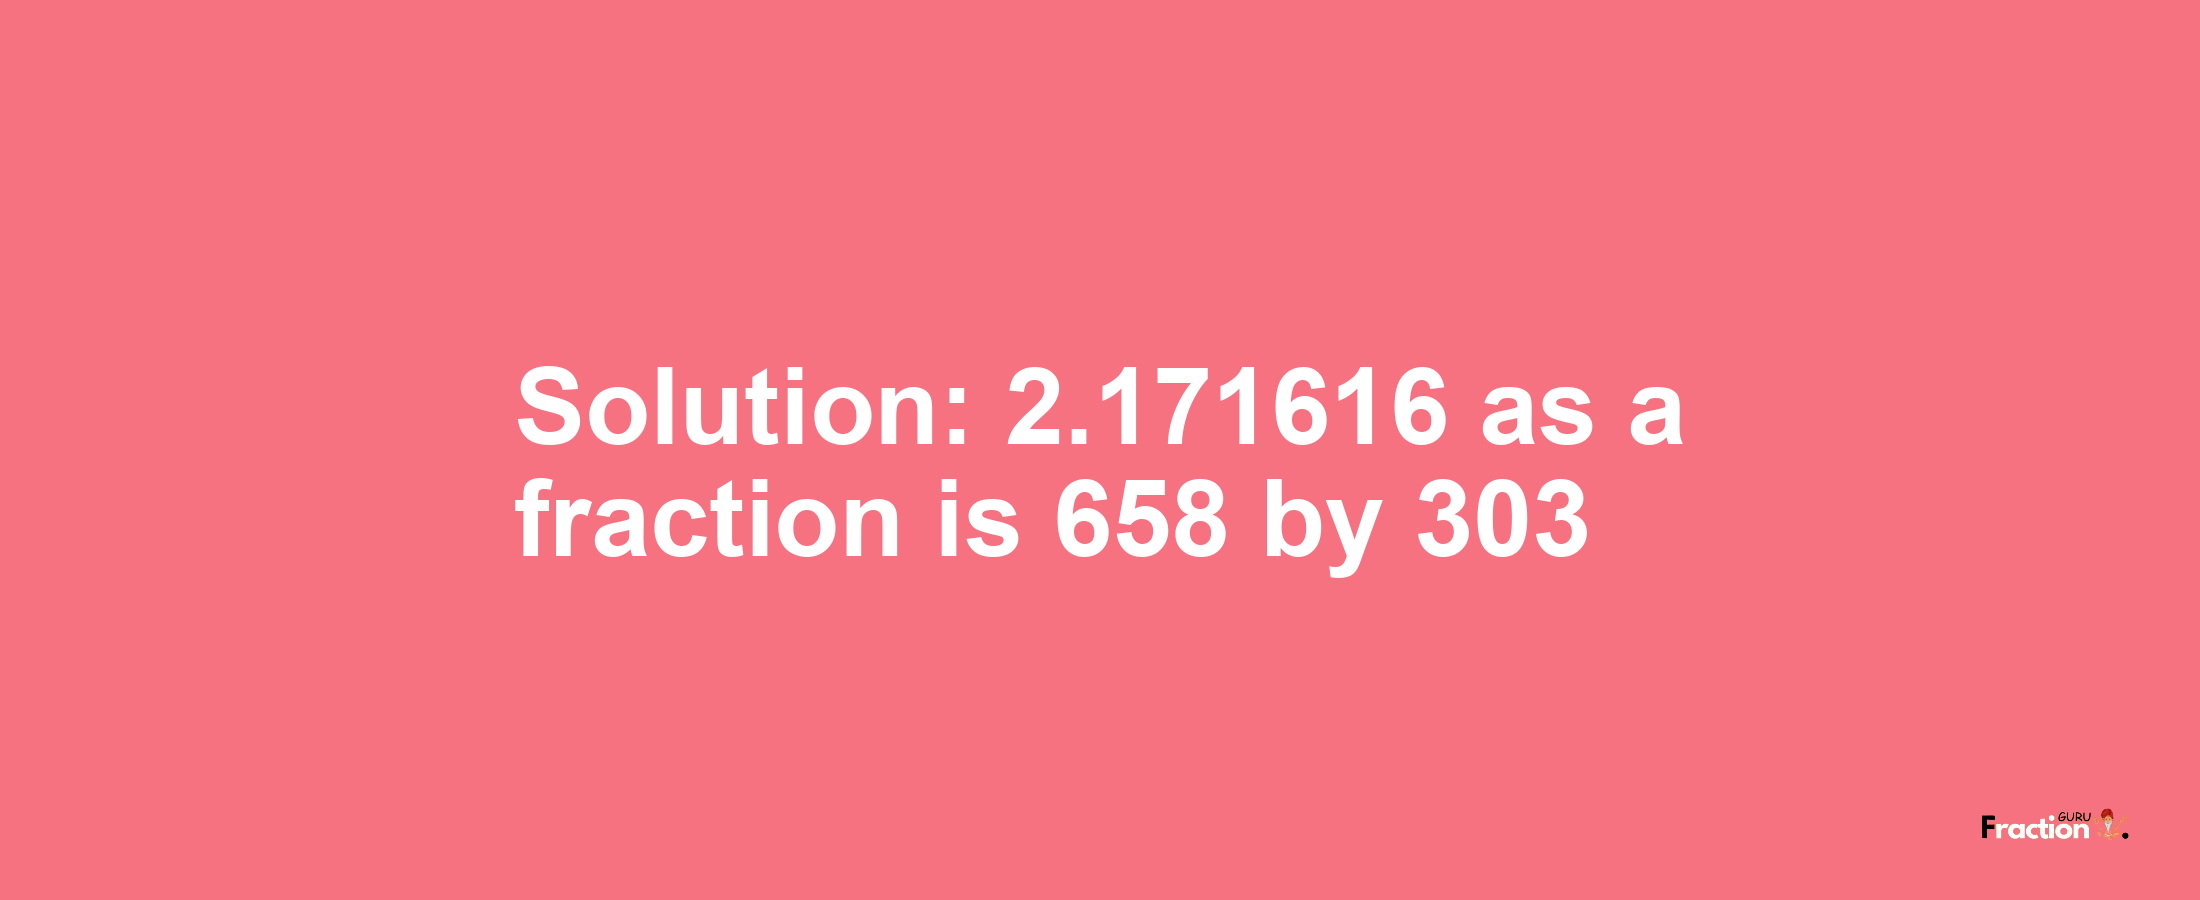 Solution:2.171616 as a fraction is 658/303